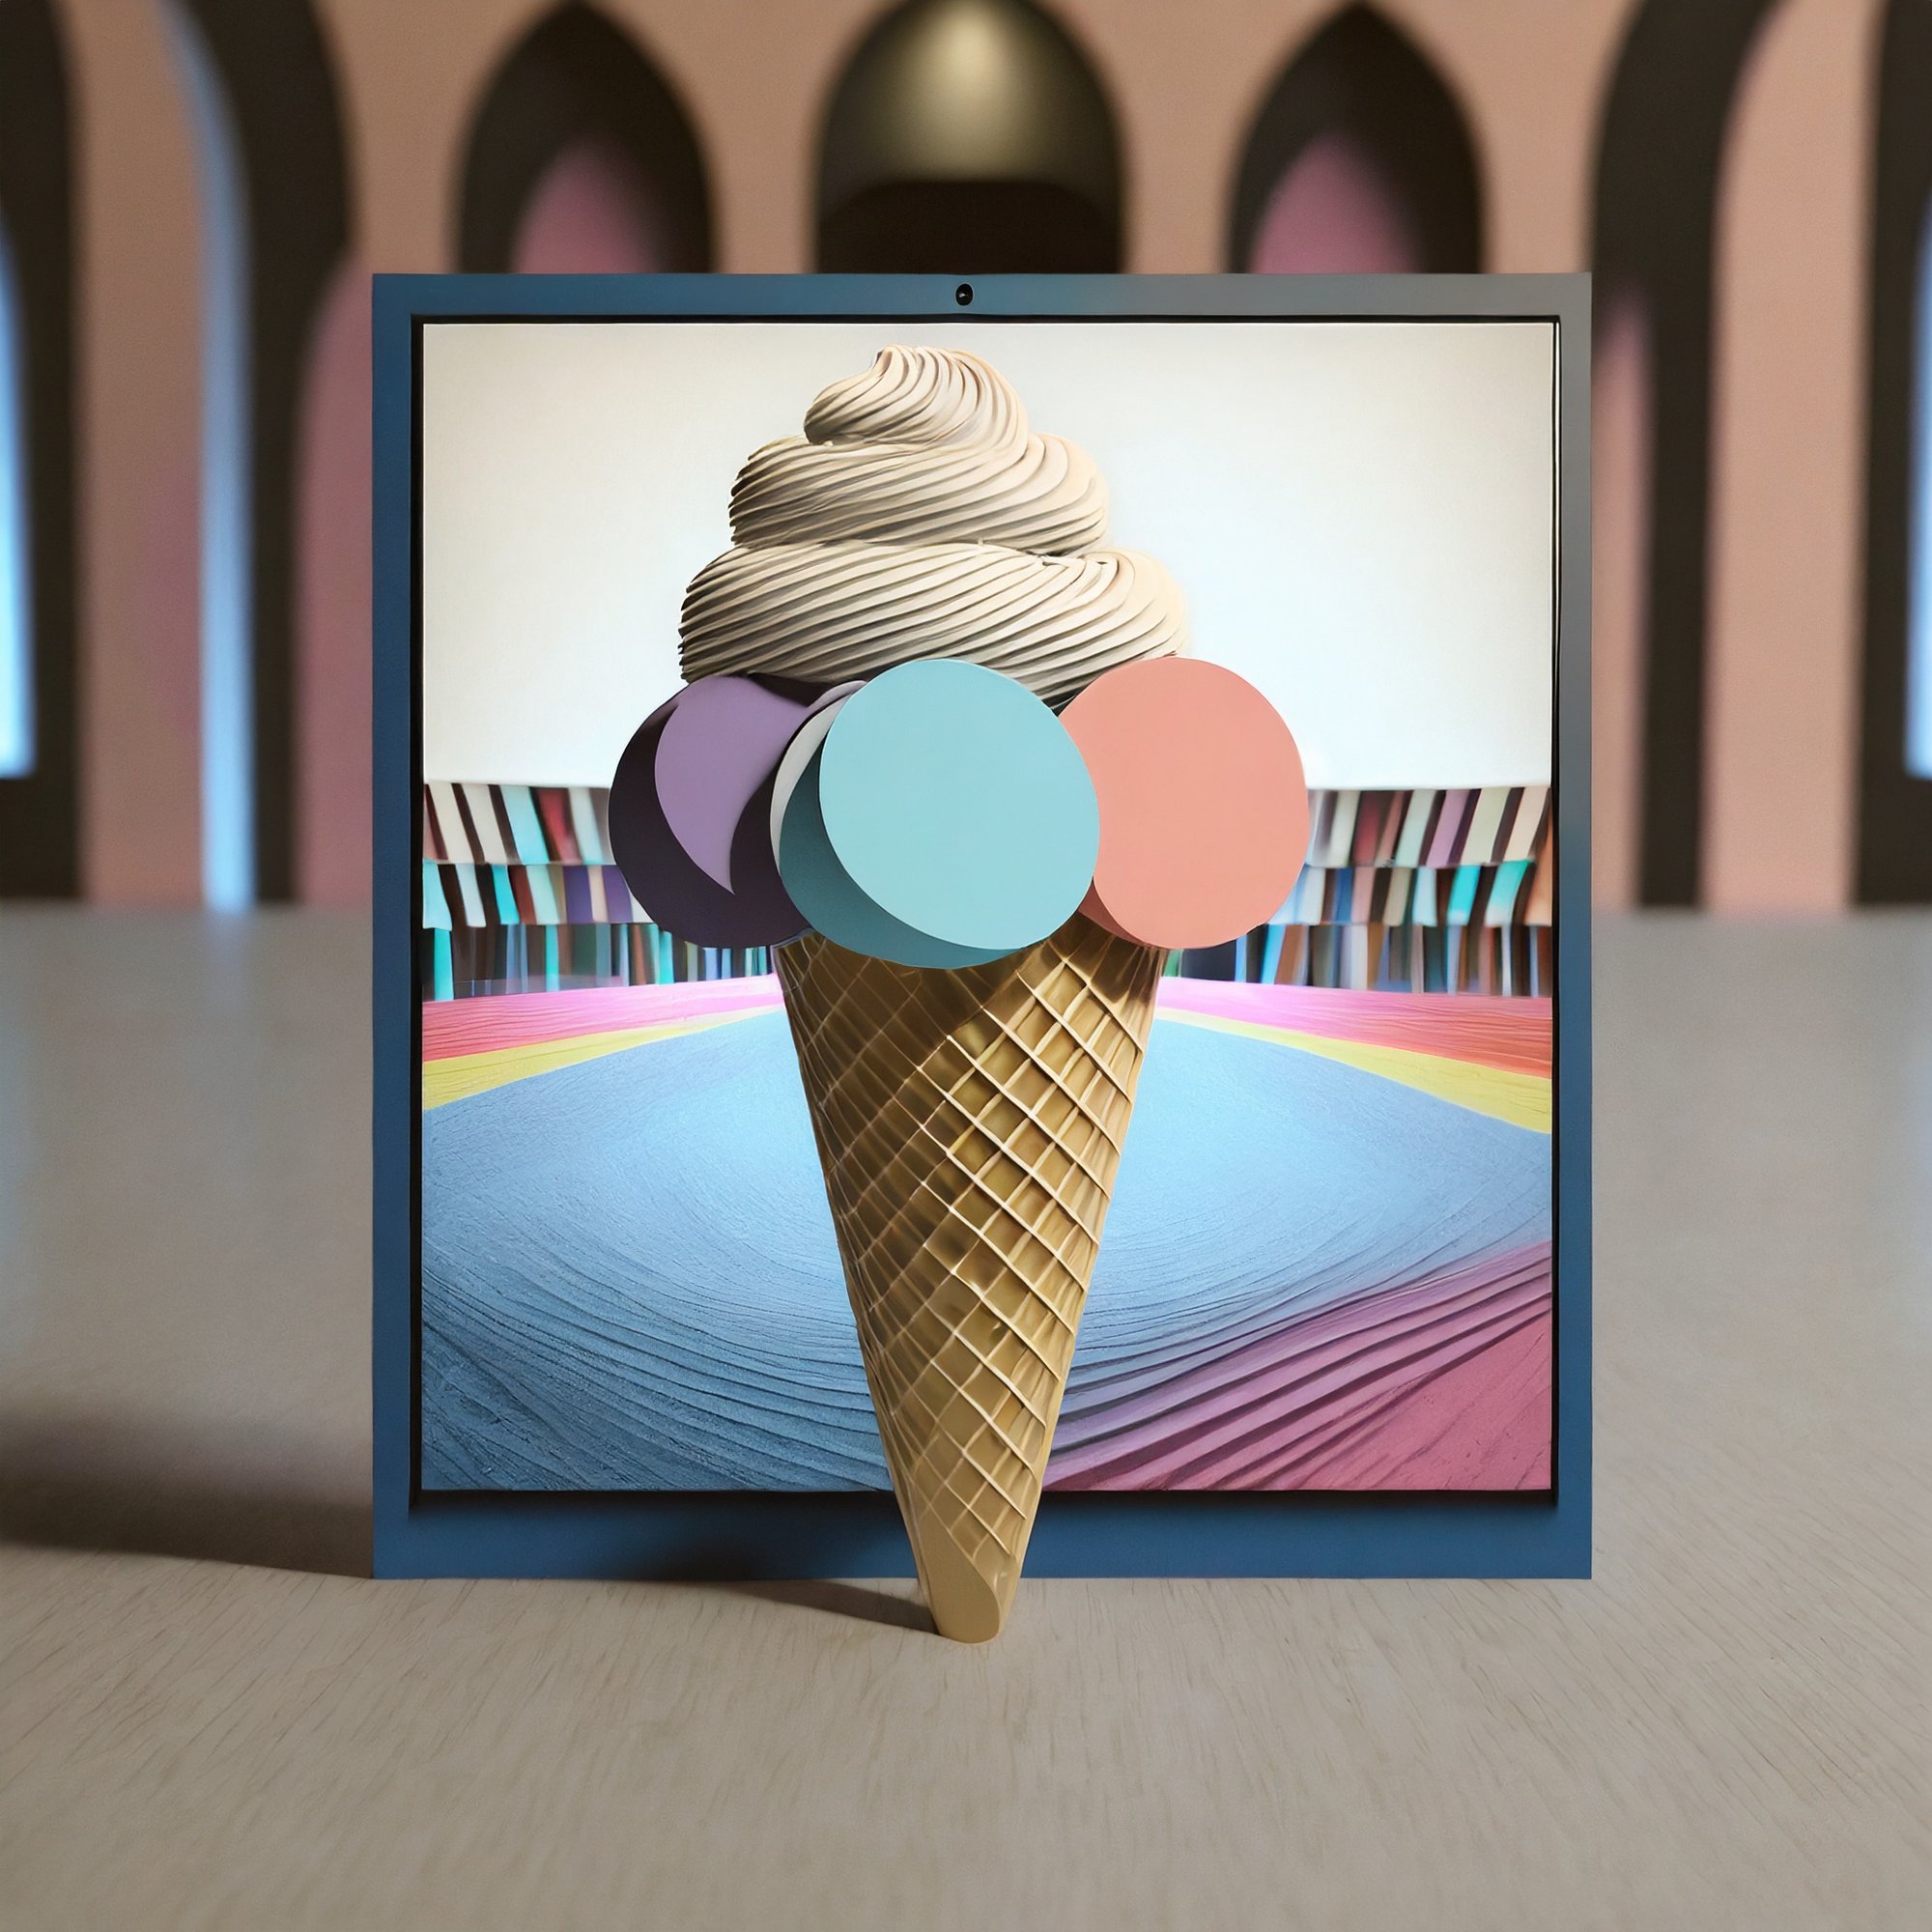 Firefly photo realistic picture of sugar cone with rainbow ice cream placed infront of screen with a (5)